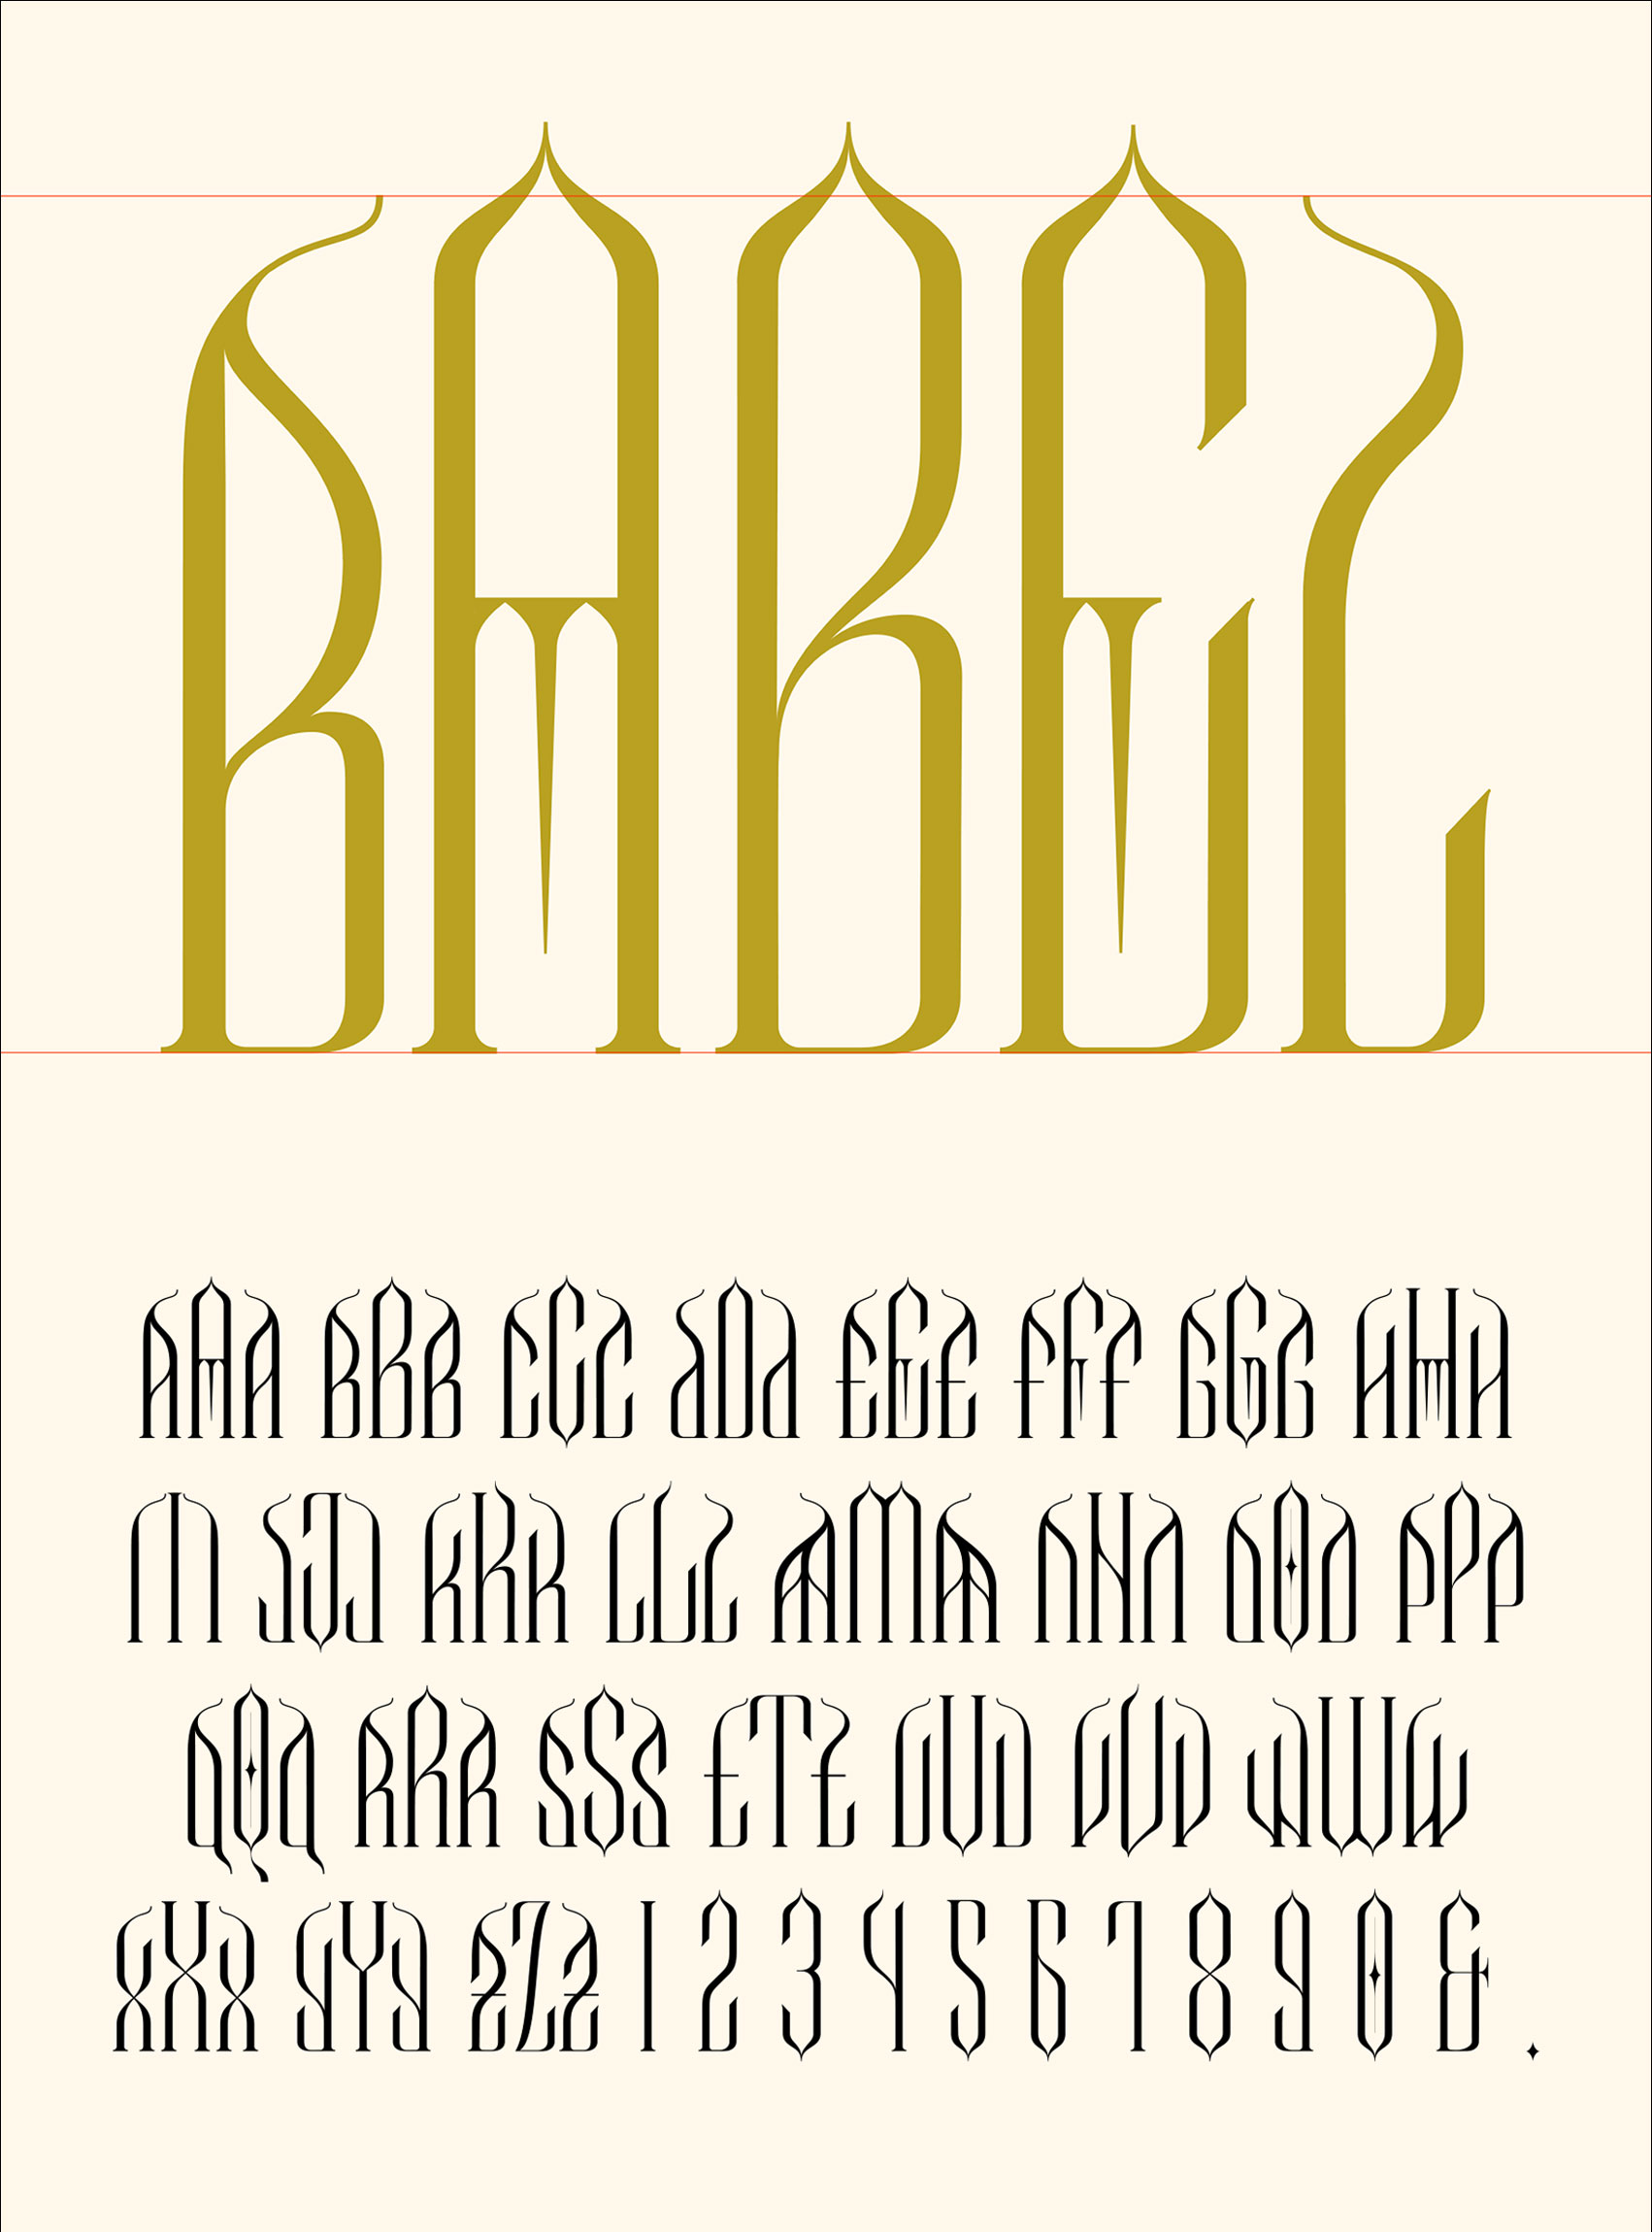 Typeface in a gothic style with long letters inspired by German cathedral architecture.